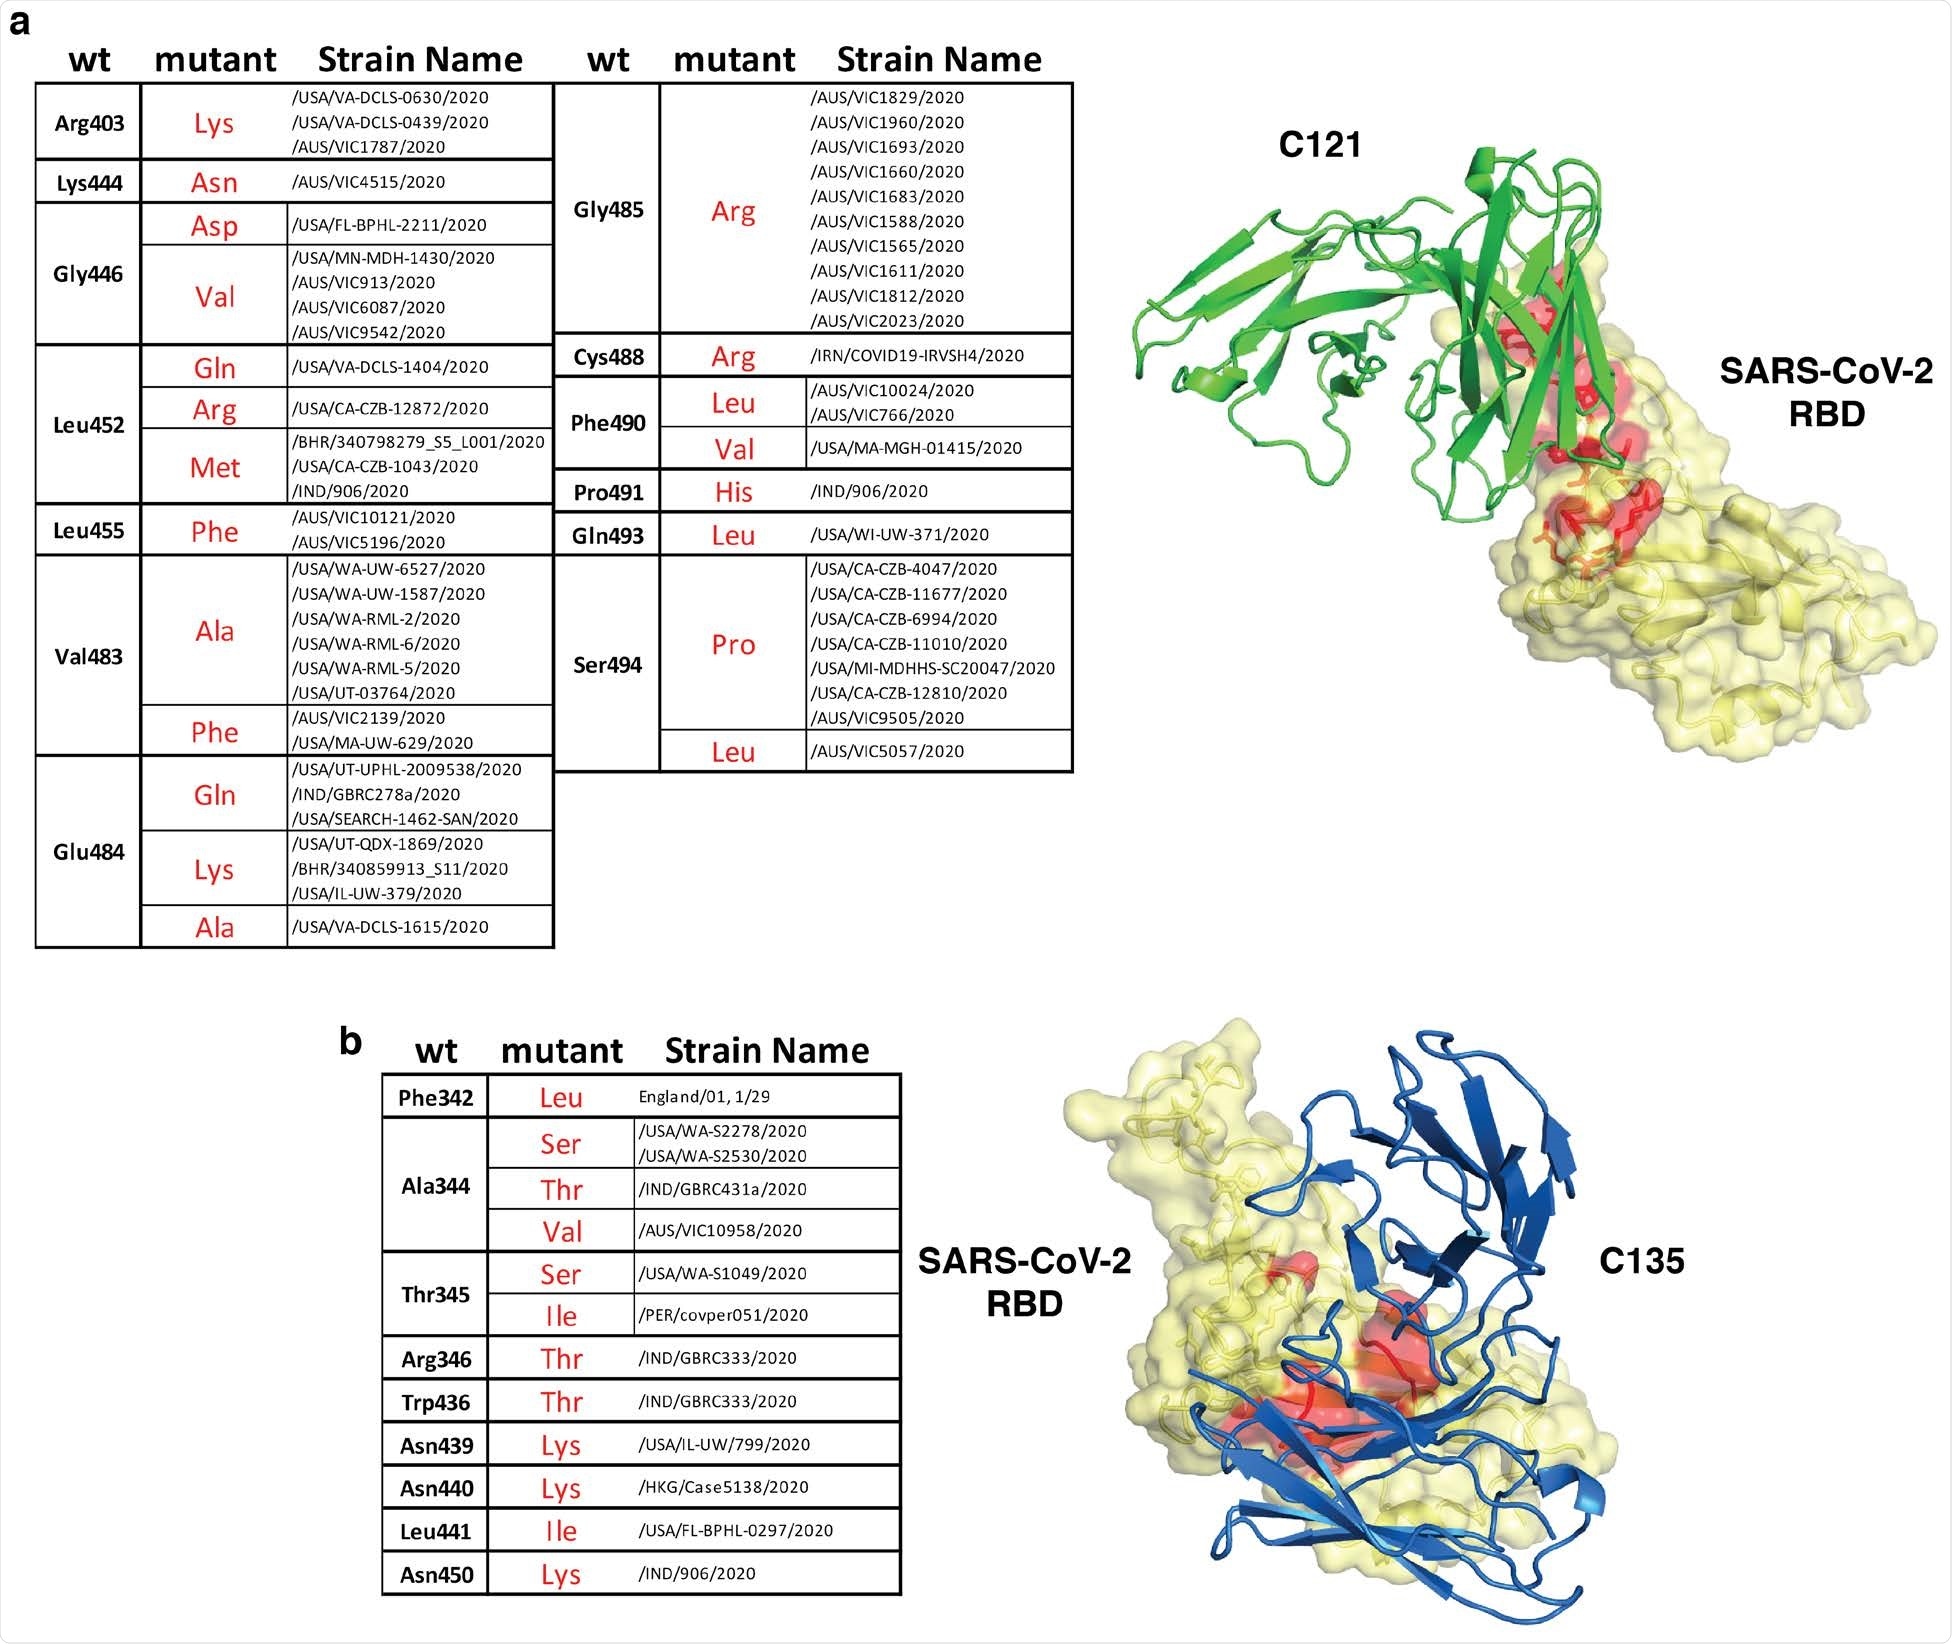 Natural SARS-CoV-2 variants in the C121 and C135 epitopes. Summary of naturally occurring mutations in the C121 (a) or C135 (b) epitopes reported in circulating SARS-CoV-2 (as of January 1, 2021). The location of the mutated residues is shown in red on the RBD structure. C121 and C135 variable regions are in green and blue (PDB ID: 7K8X and 7K8Z respectively).